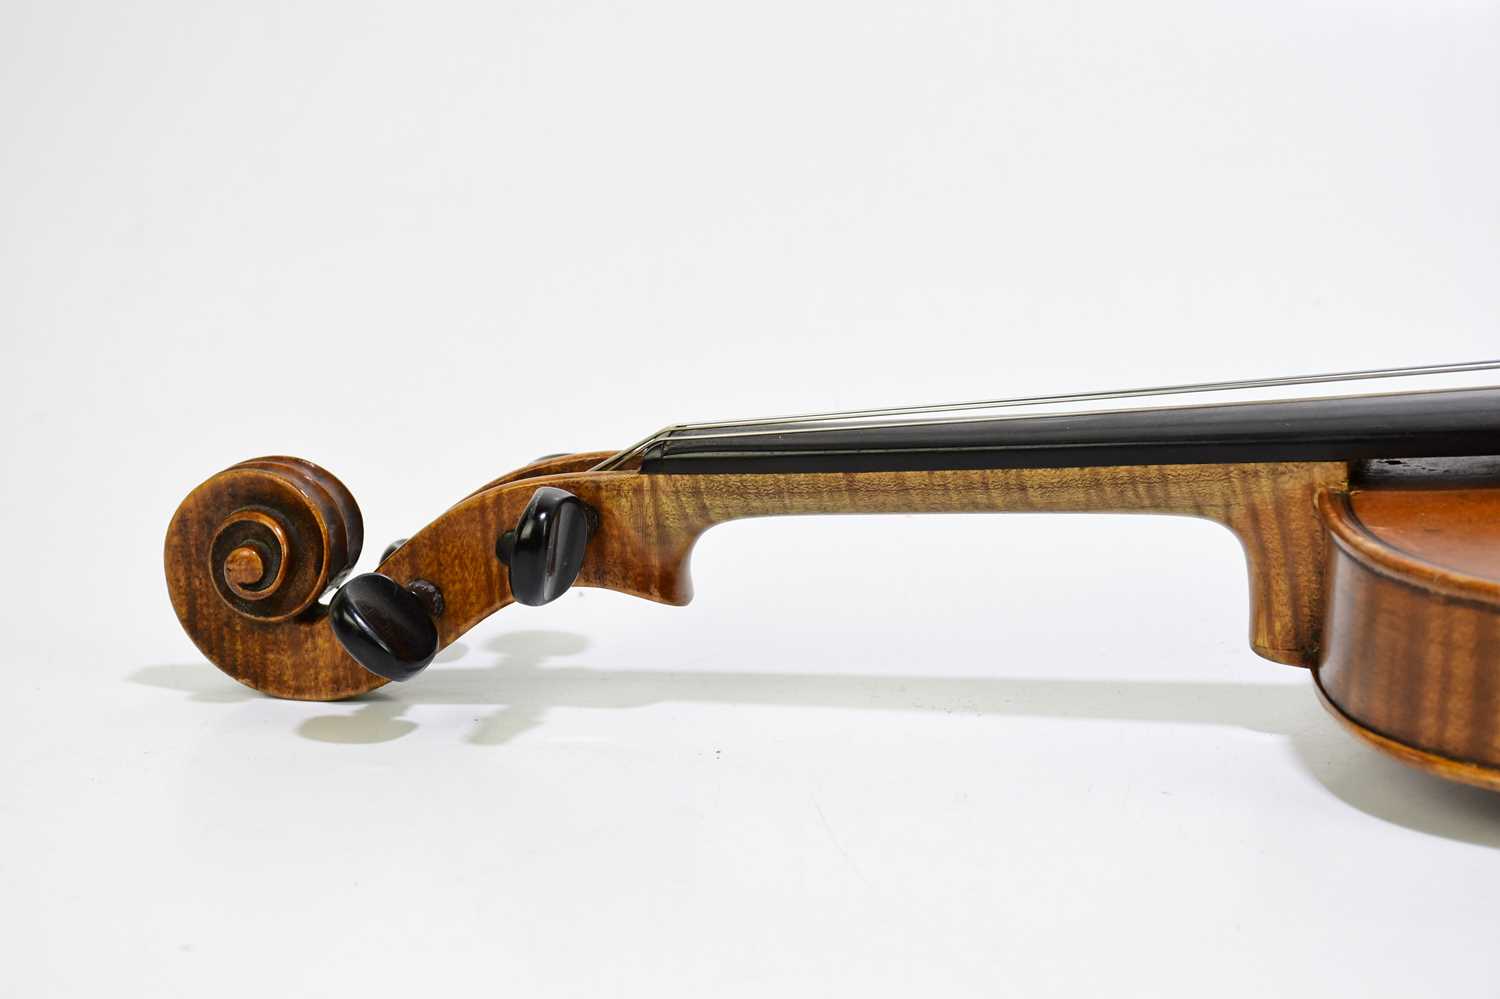 WOLFF BROS; a full size violin with two-piece back, length 35.6cm, cased with two bows. - Image 5 of 8